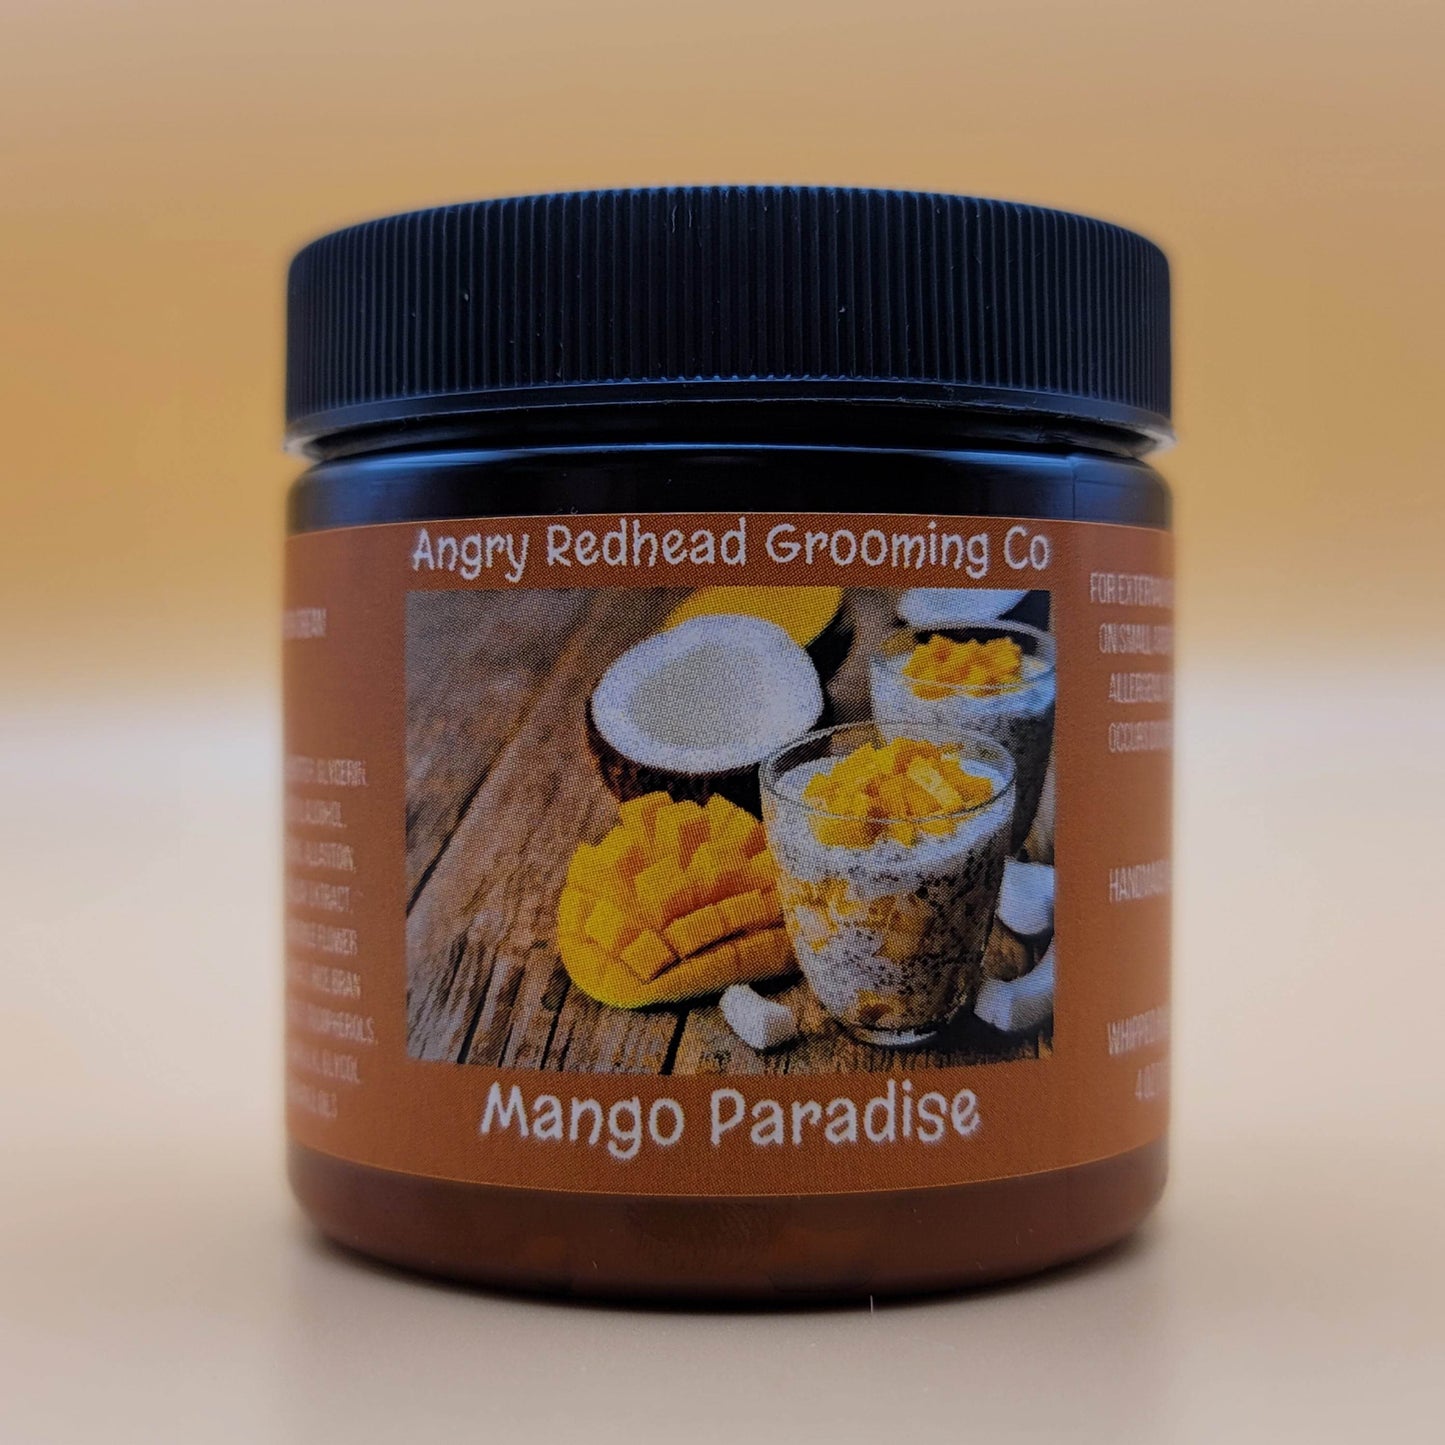 Mango Paradise Whipped Body Butter by Angry Redhead Grooming Co - angryredheadgrooming.com